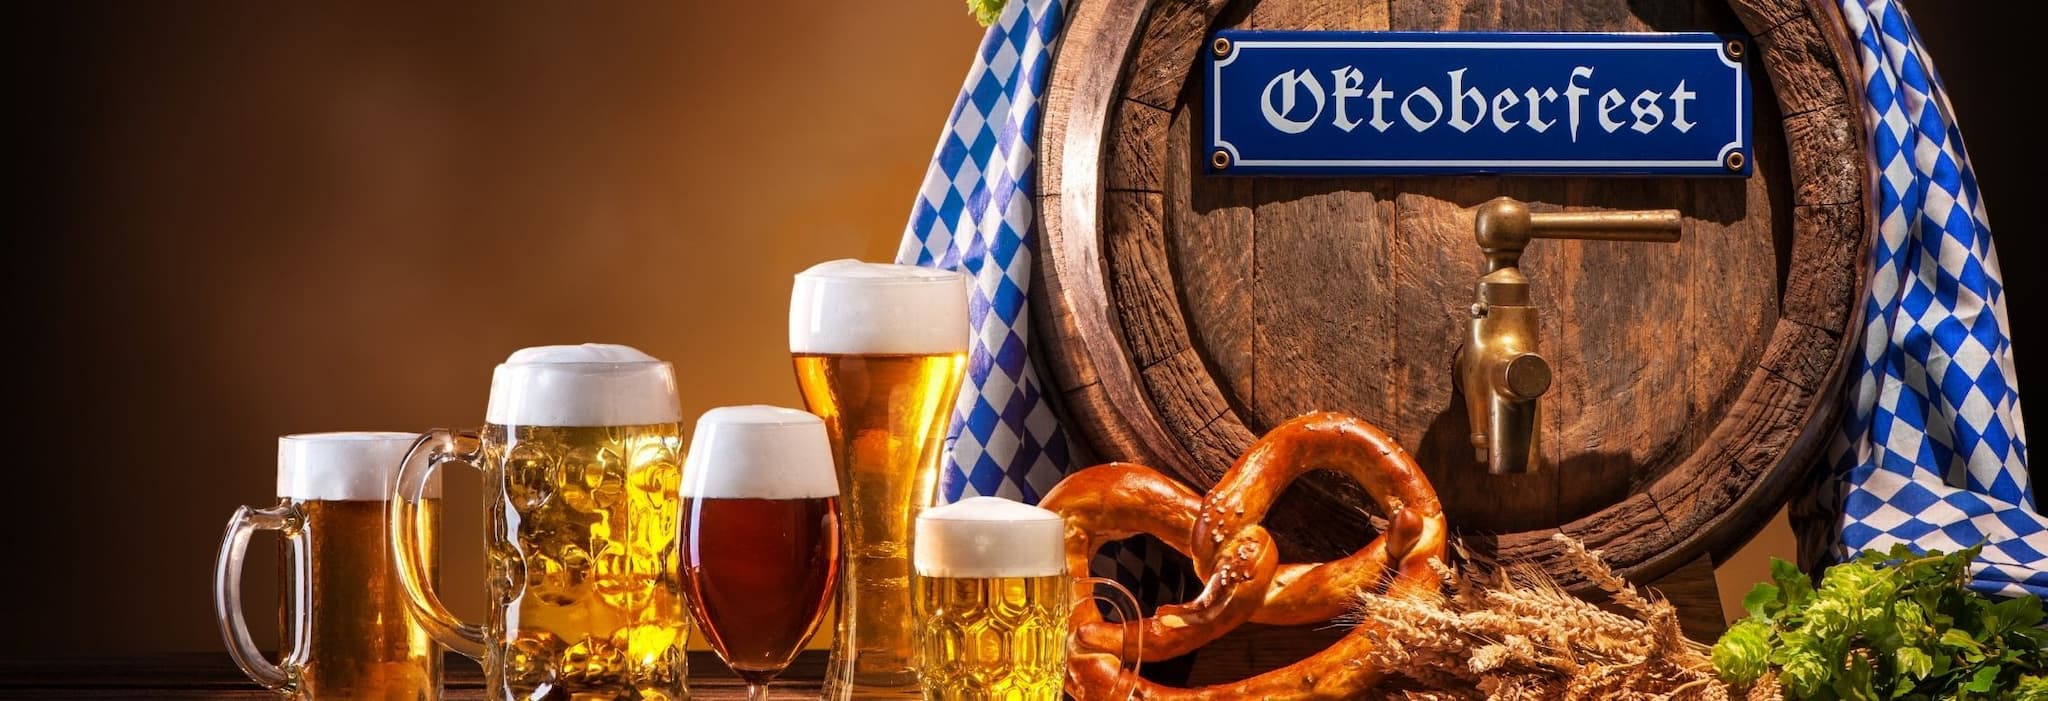 5 Places In India Where You Can Still Celebrate The Oktoberfest